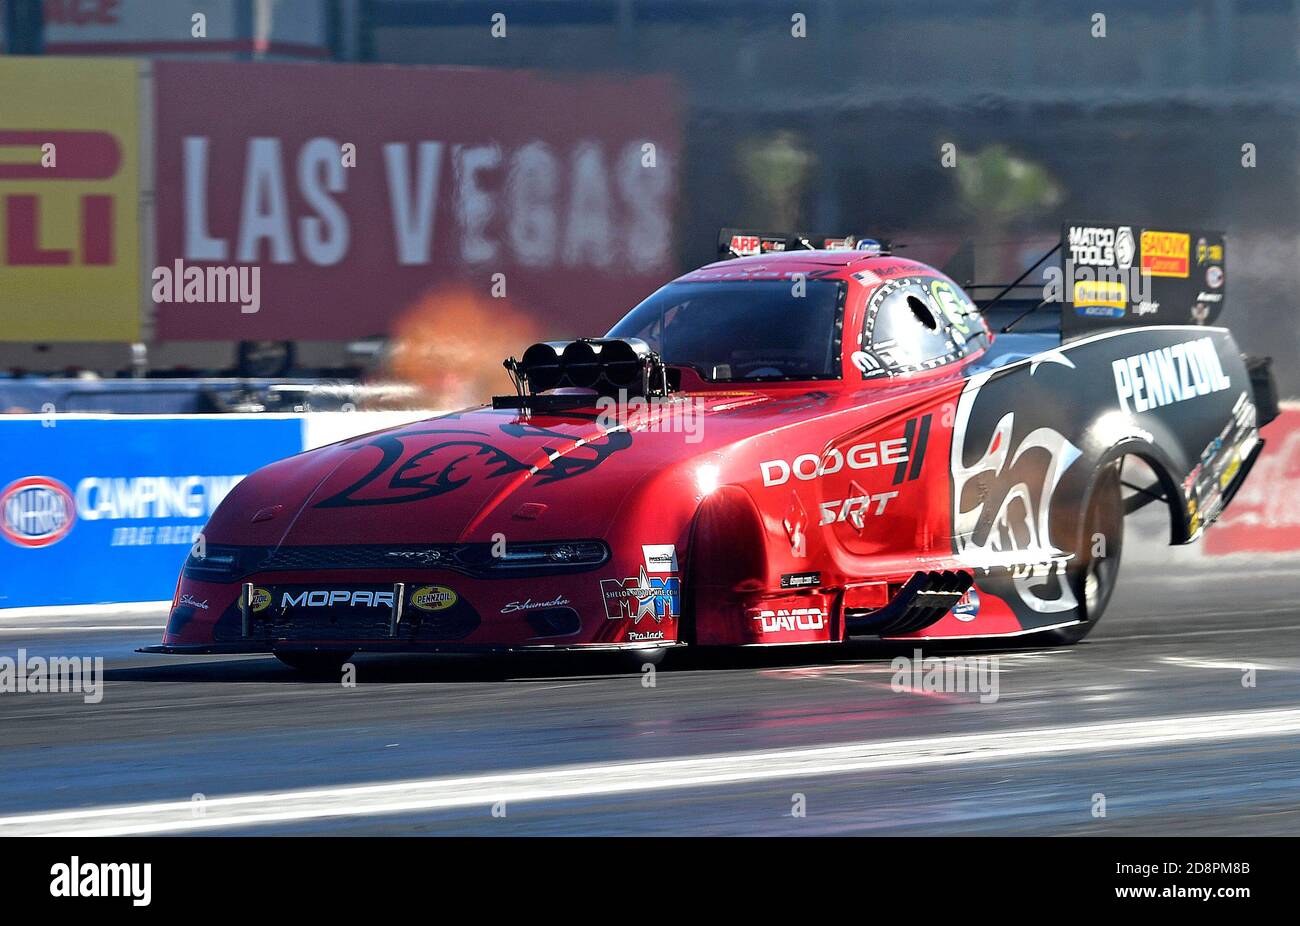 Las Vegas, CA, USA. 31st Oct, 2020. Funny Car driver Matt Hagan heads down  track during the opening qualifying session during the Camping World NHRA  Dodge Finals at The Strip at Las